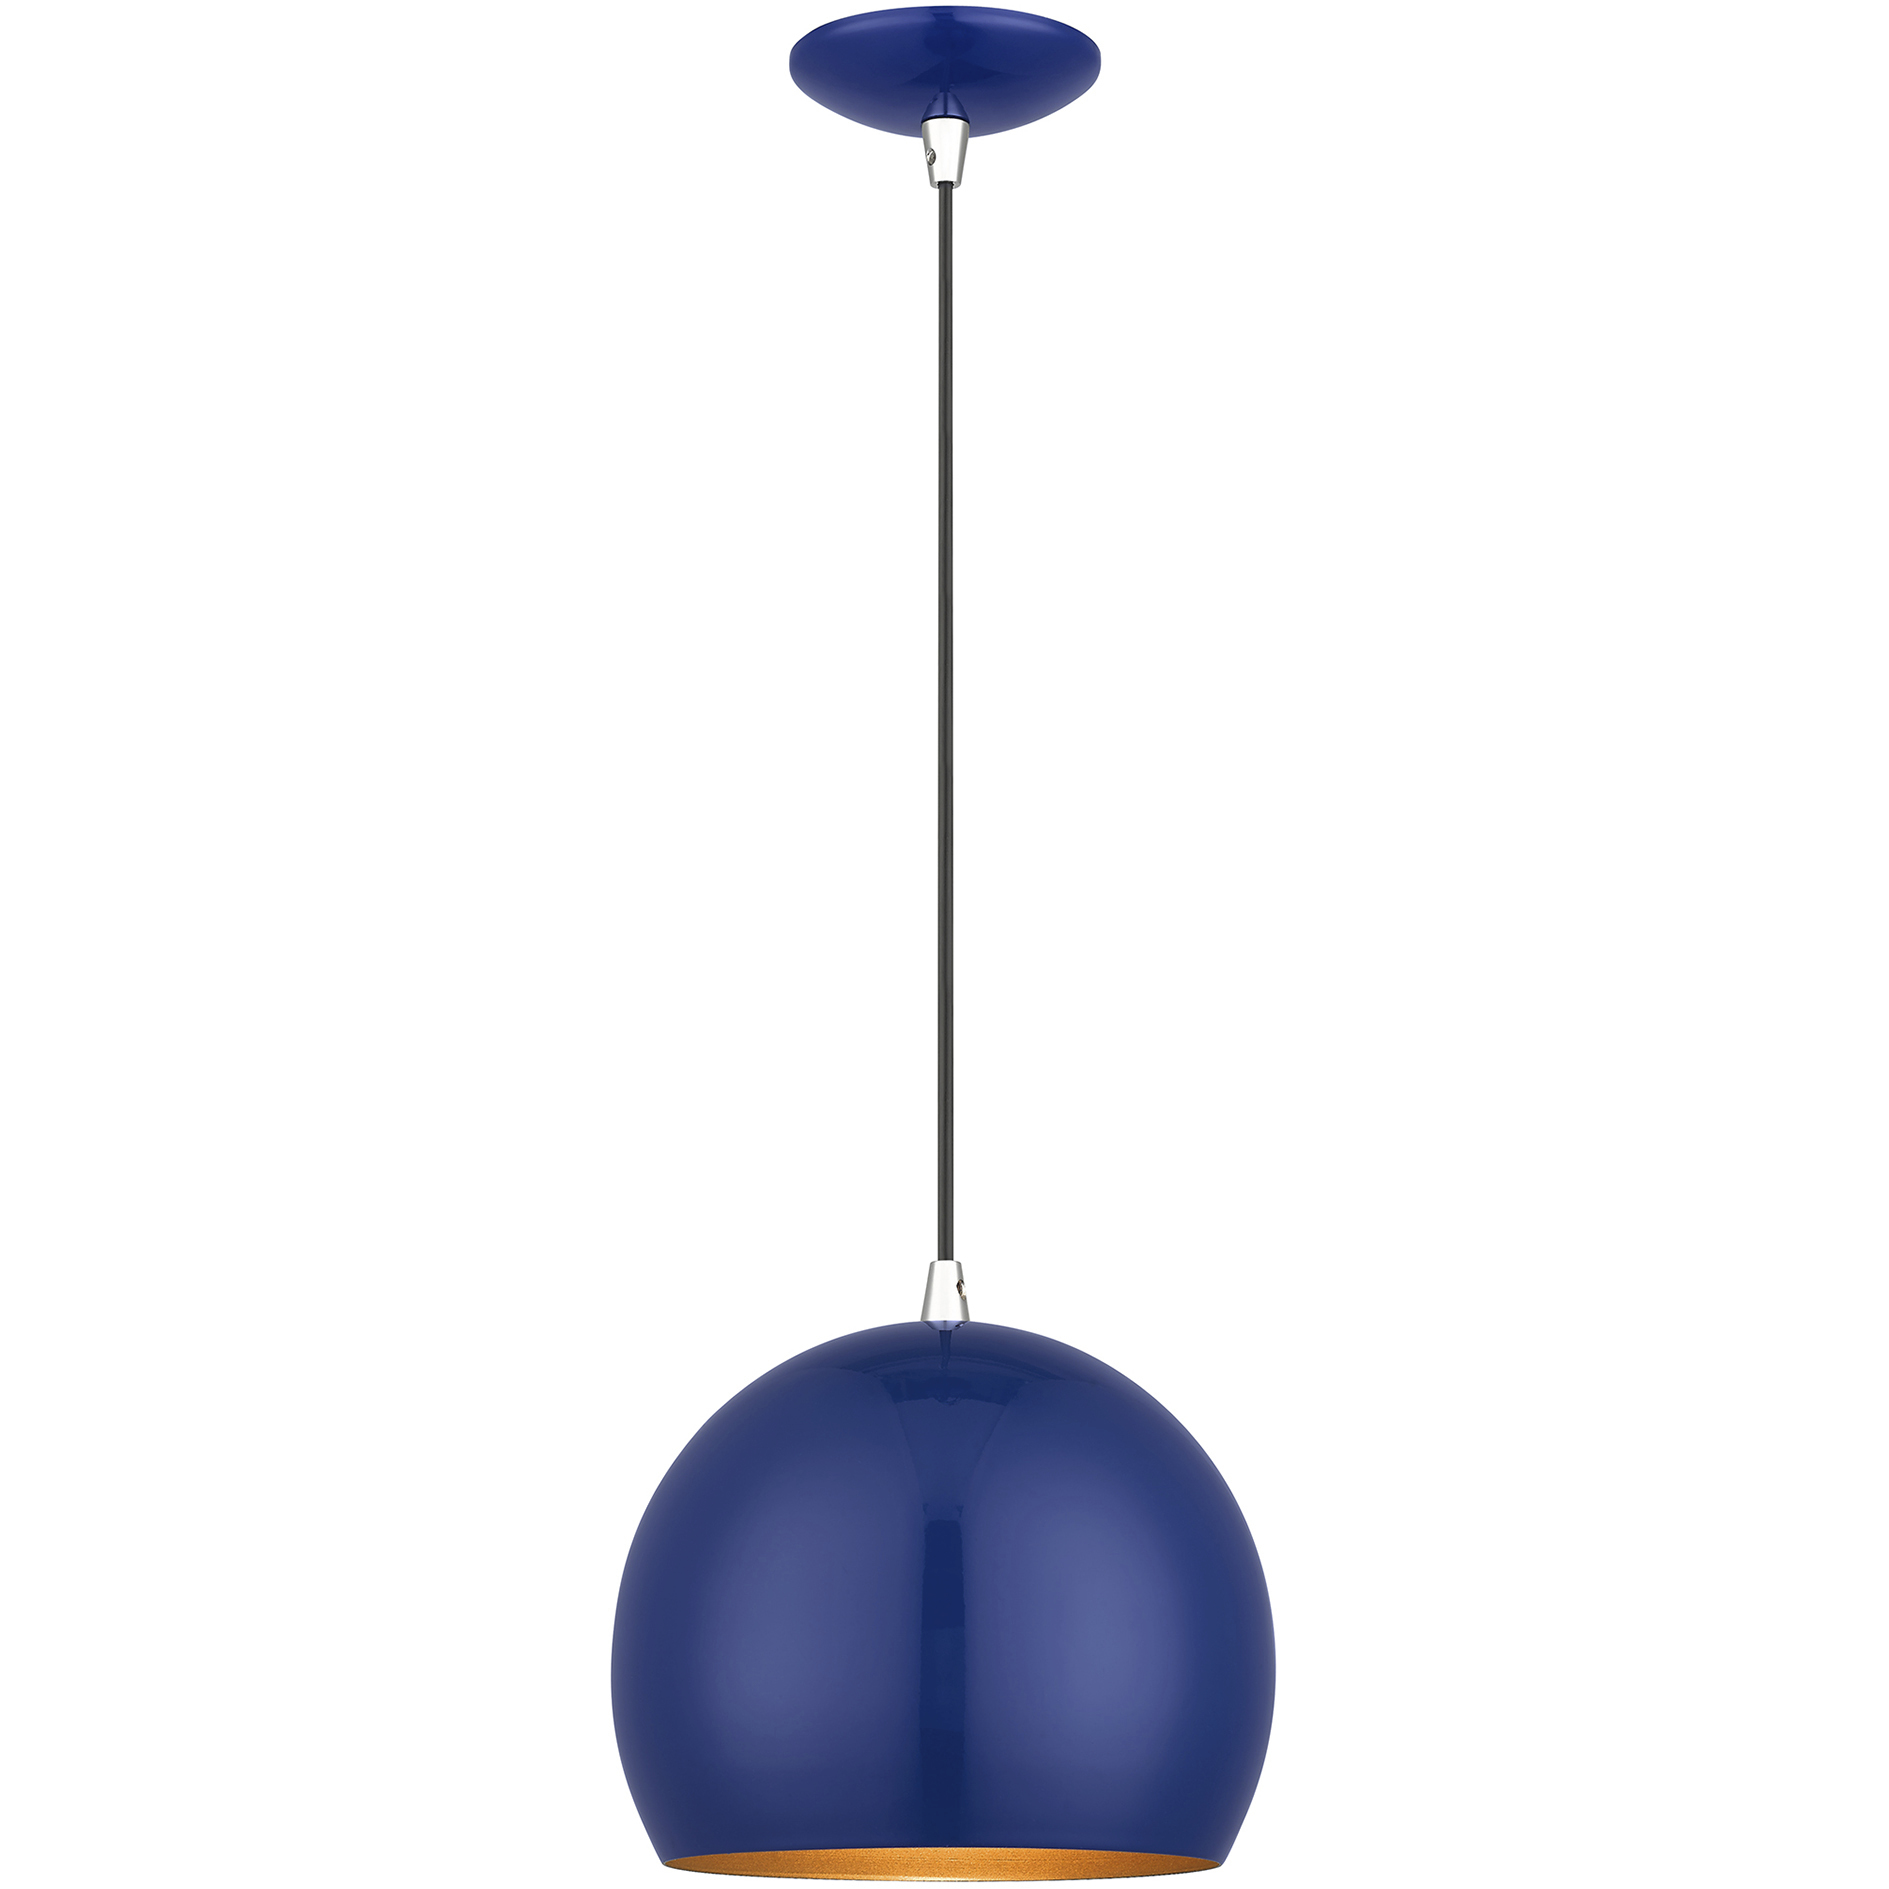 Piedmont 1 Light 10 inch Shiny Cobalt Blue with Polished Chrome Accents  Pendant Ceiling Light